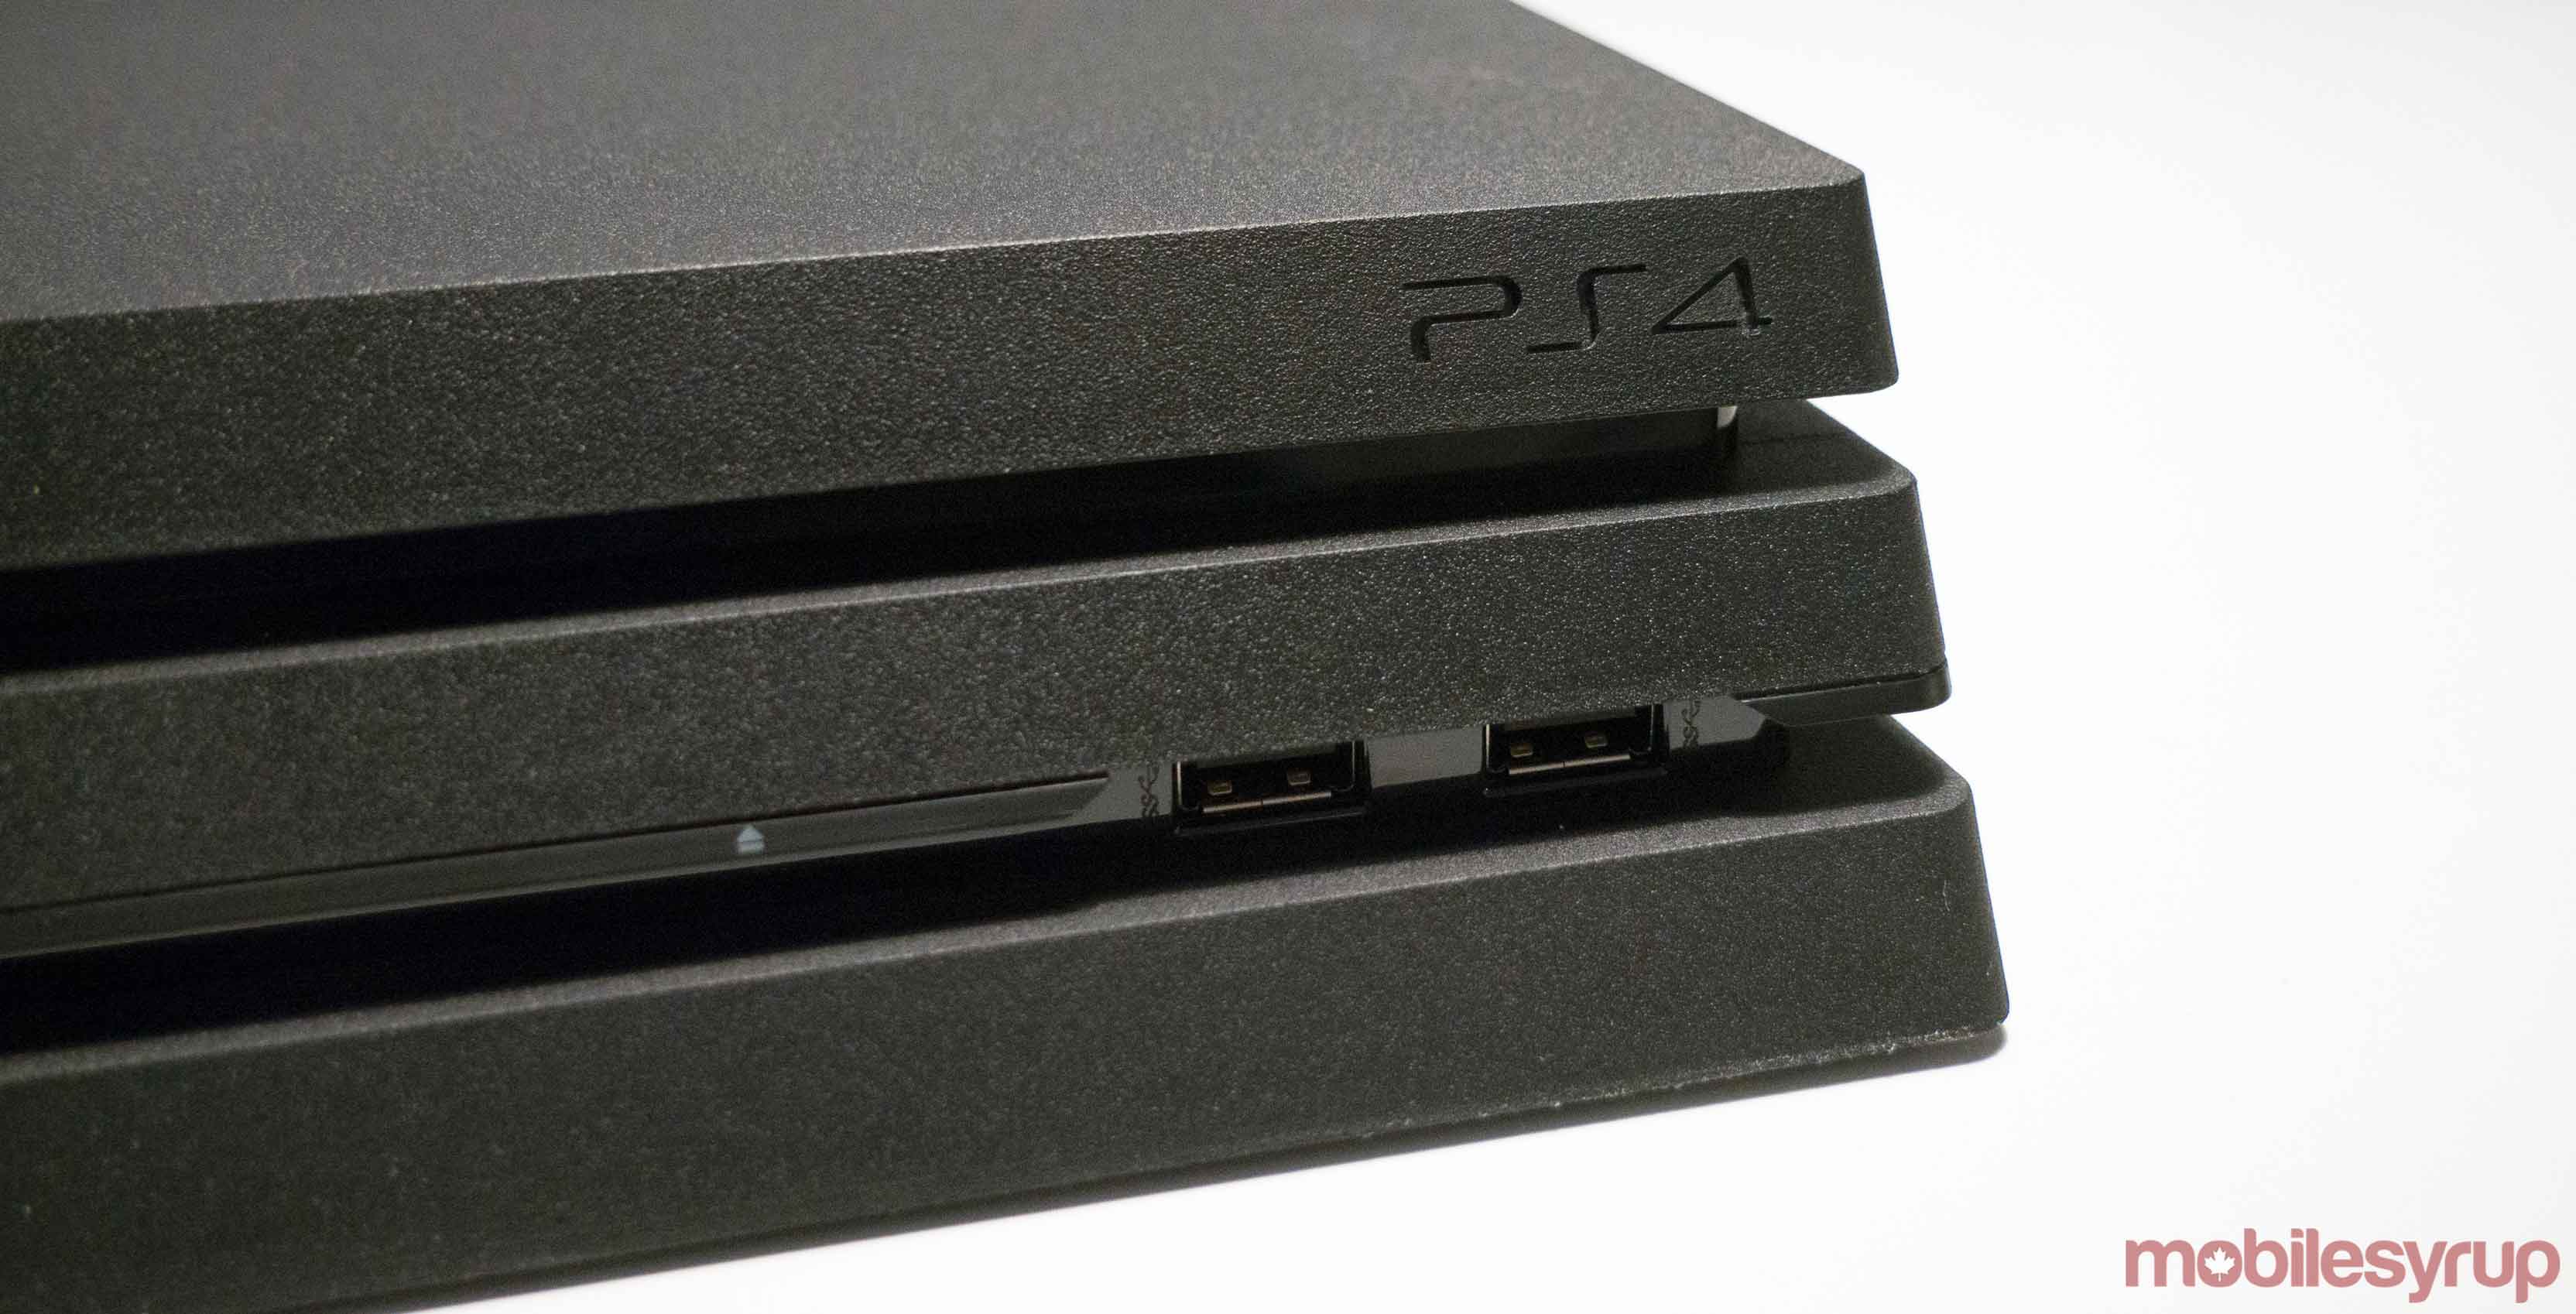 PlayStation 4 Pro front